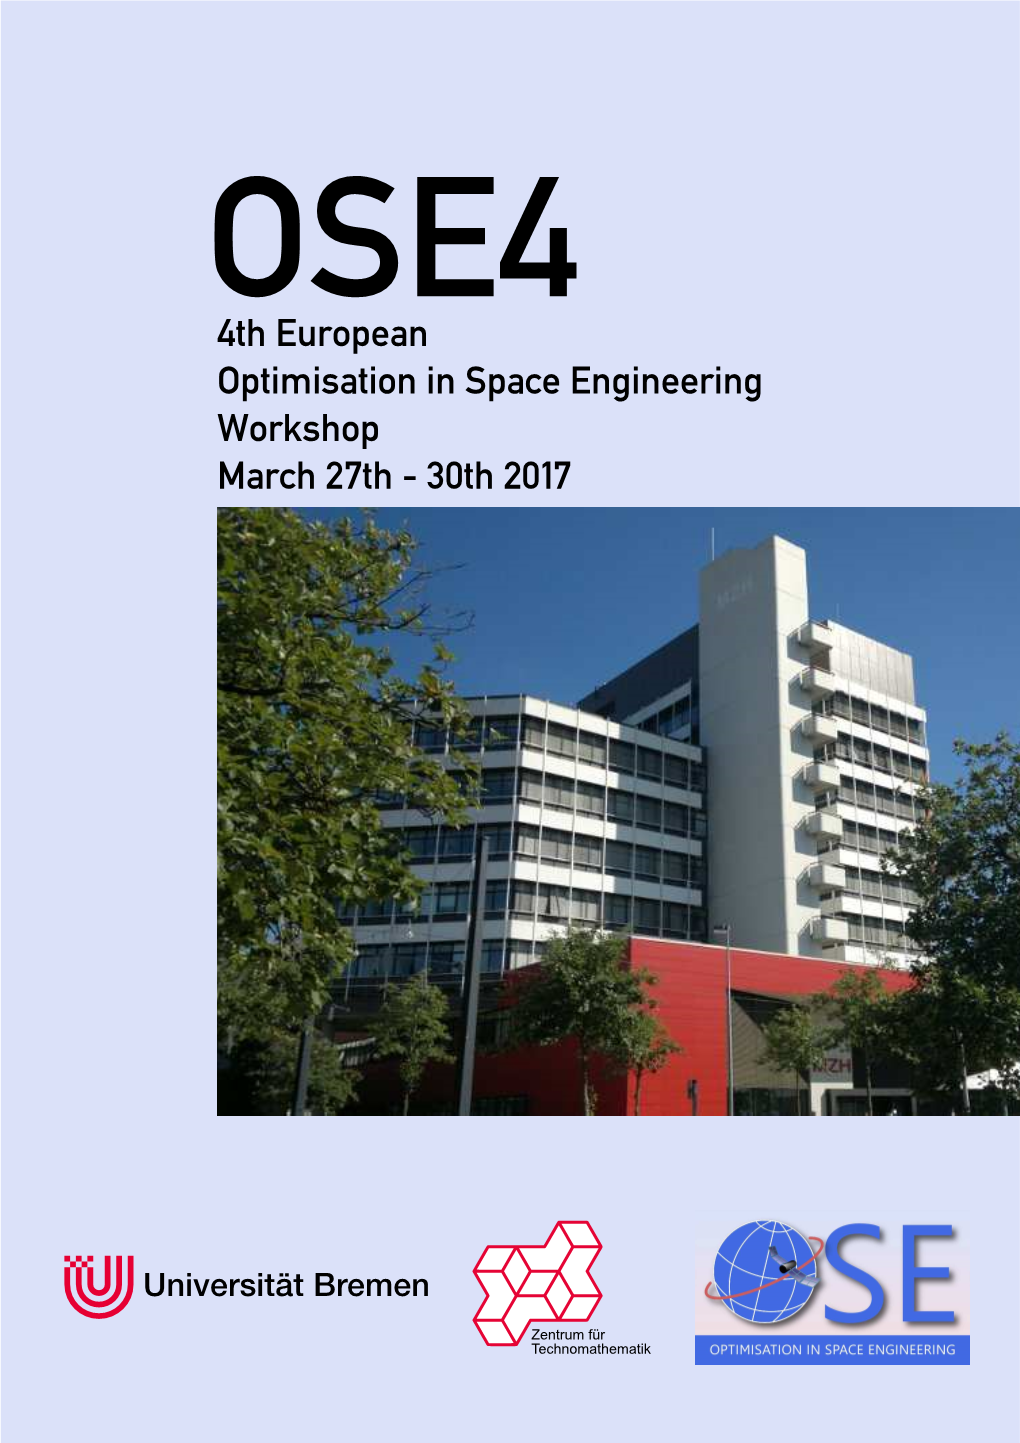 OSE4 Workshop, March 27Th